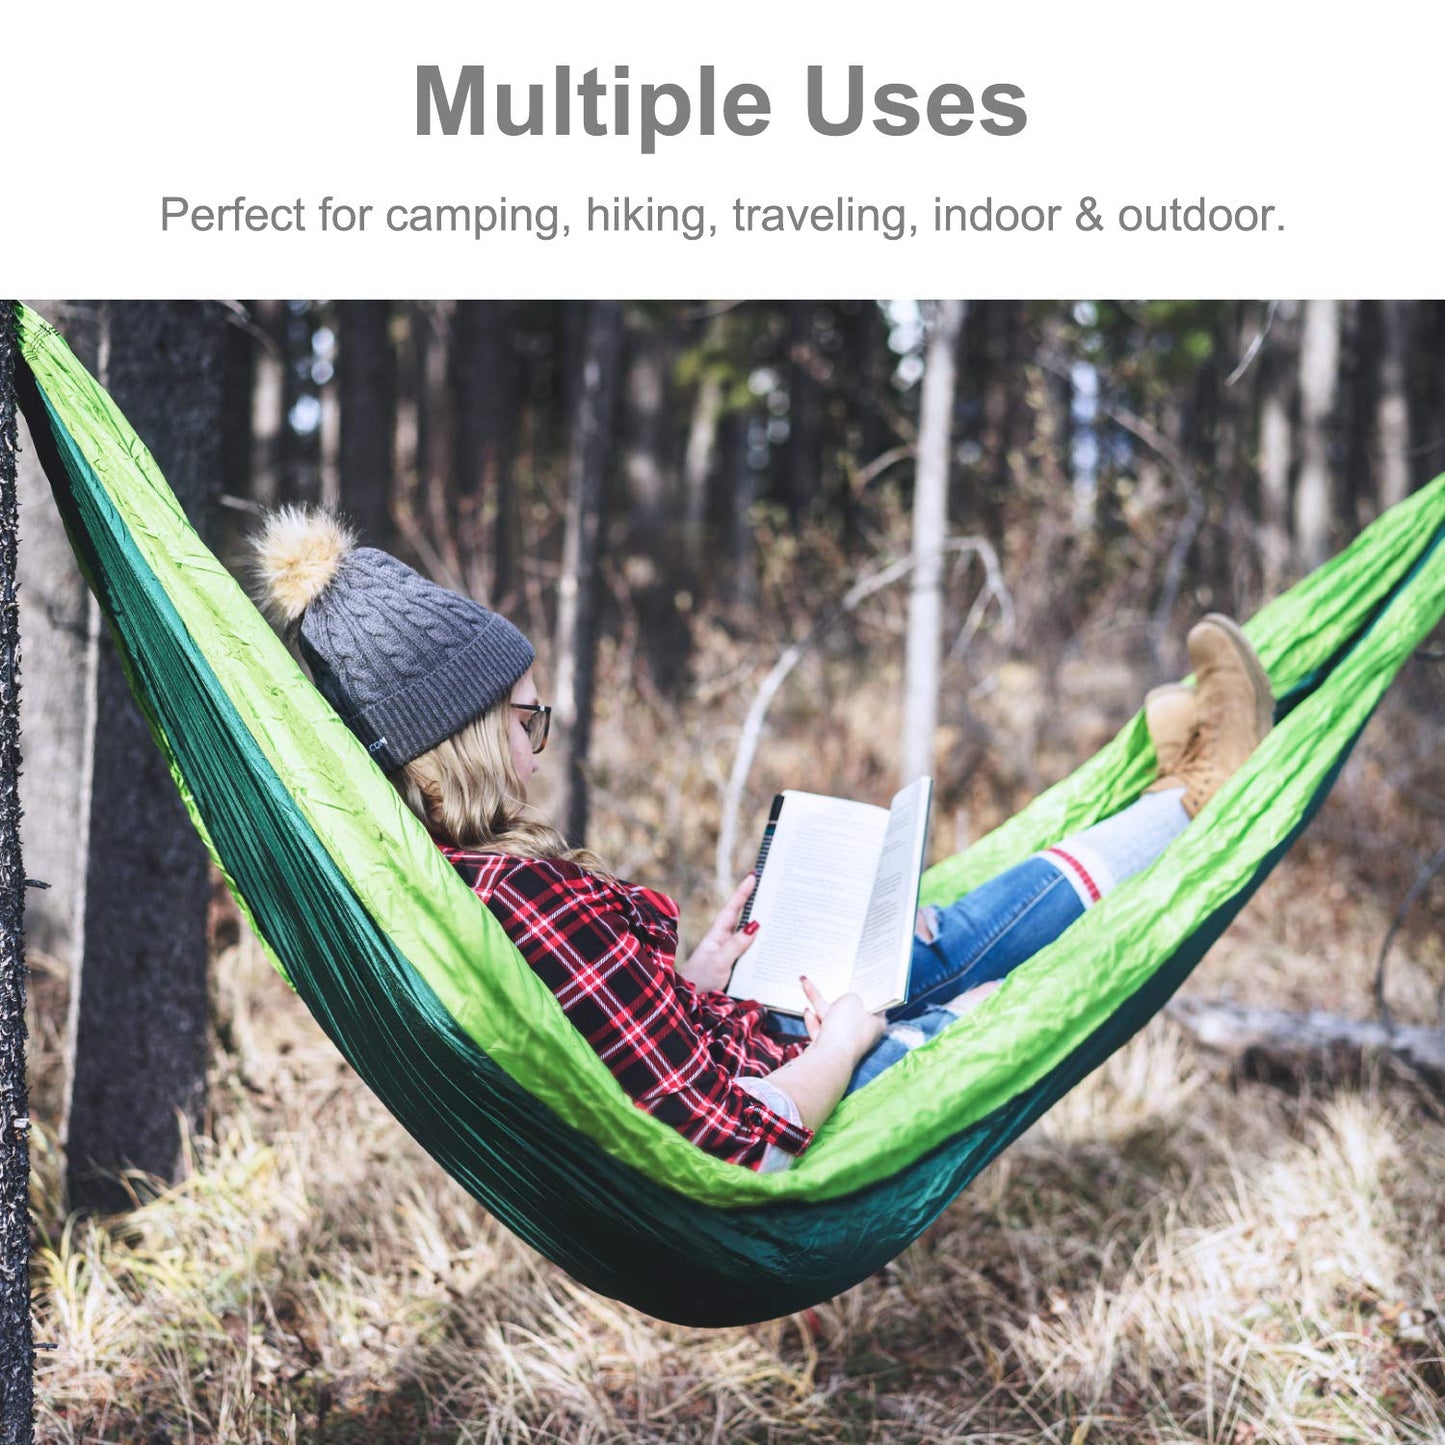 Hammock Camping with All The Installations - MIZTLI